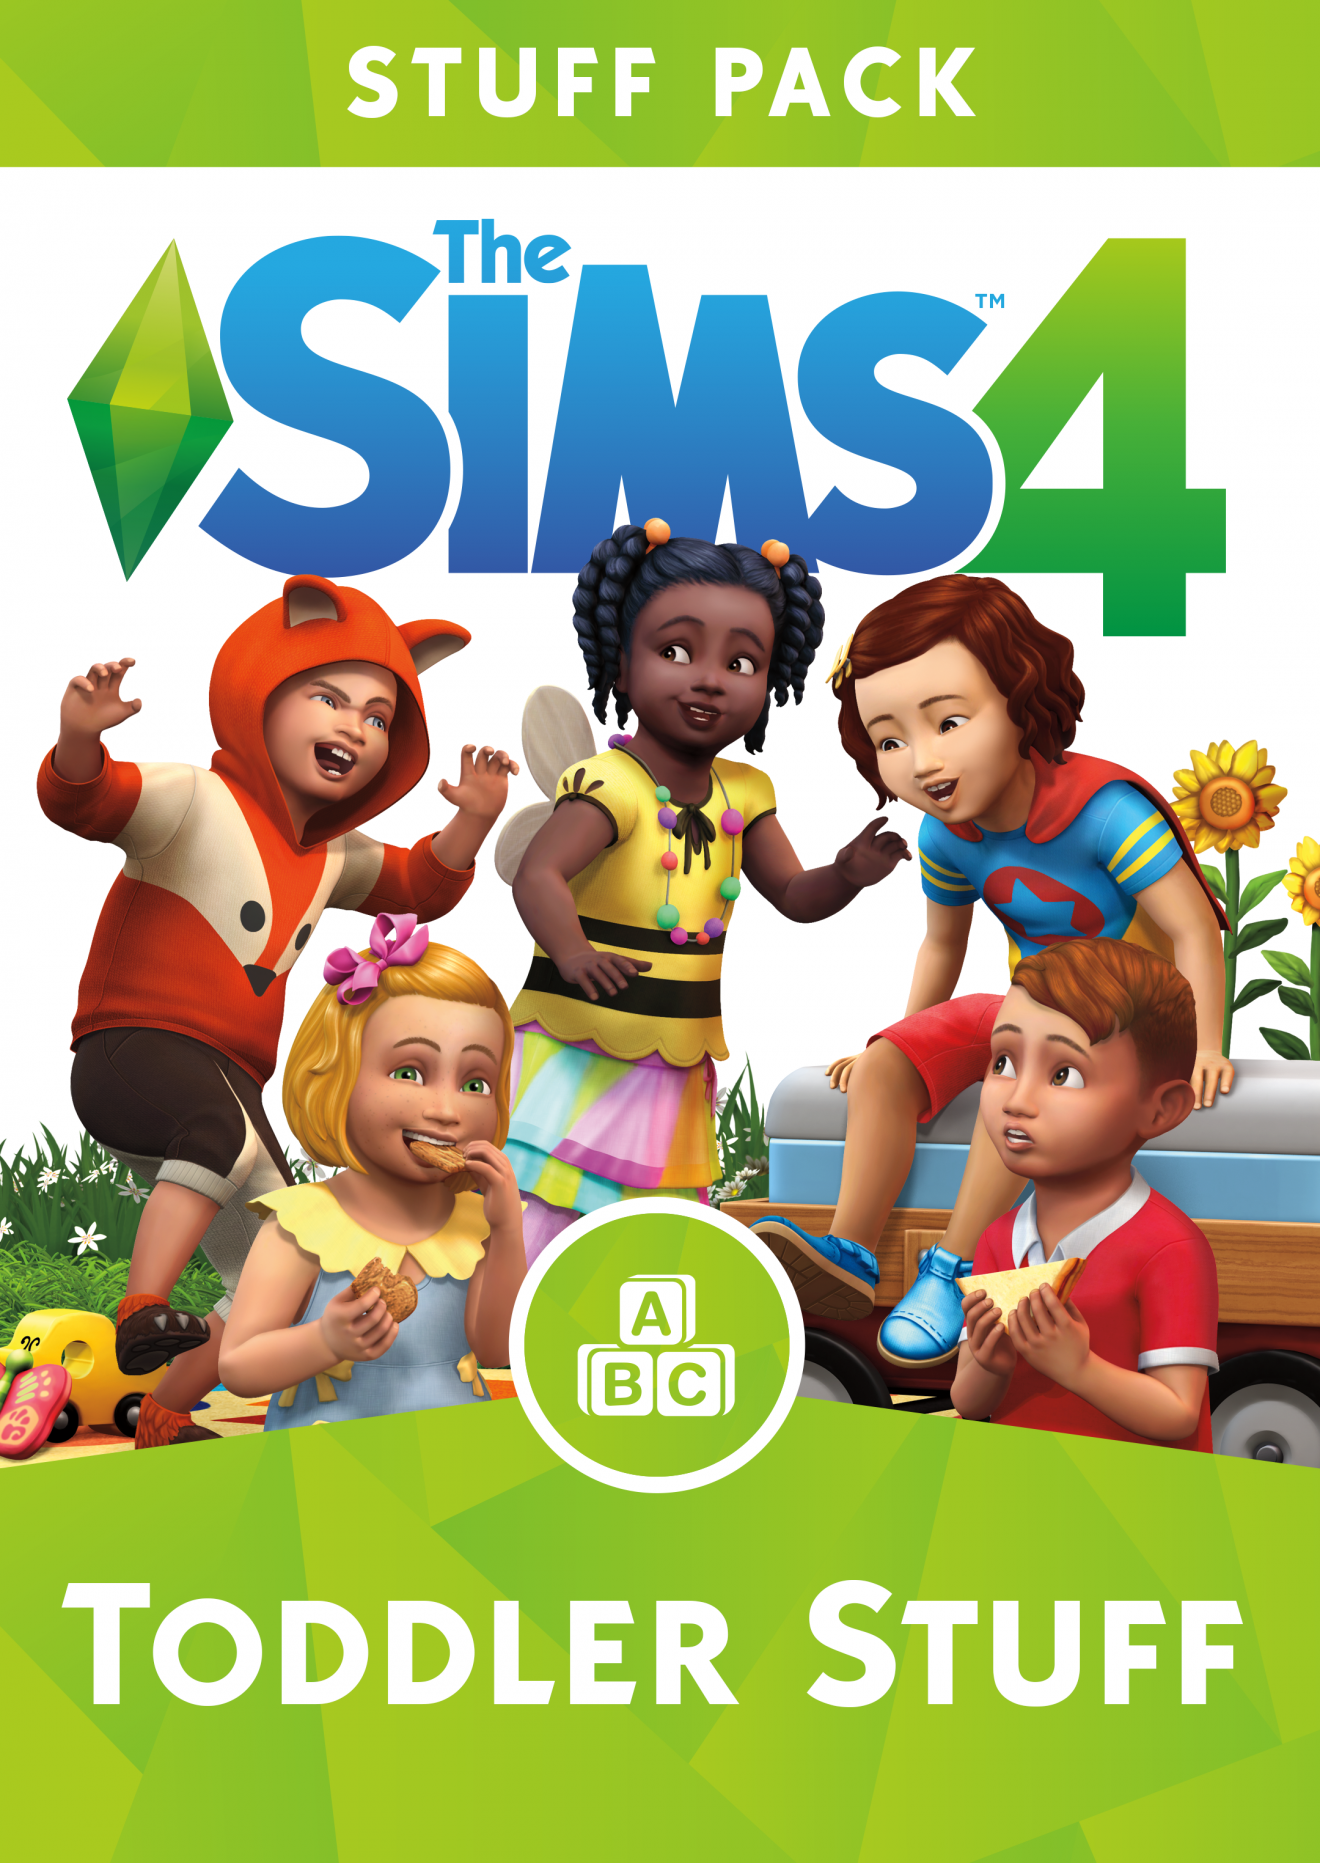 The Sims 4 Toddler Stuff: Official Logo, Box Art, & Renders | SimsVIP